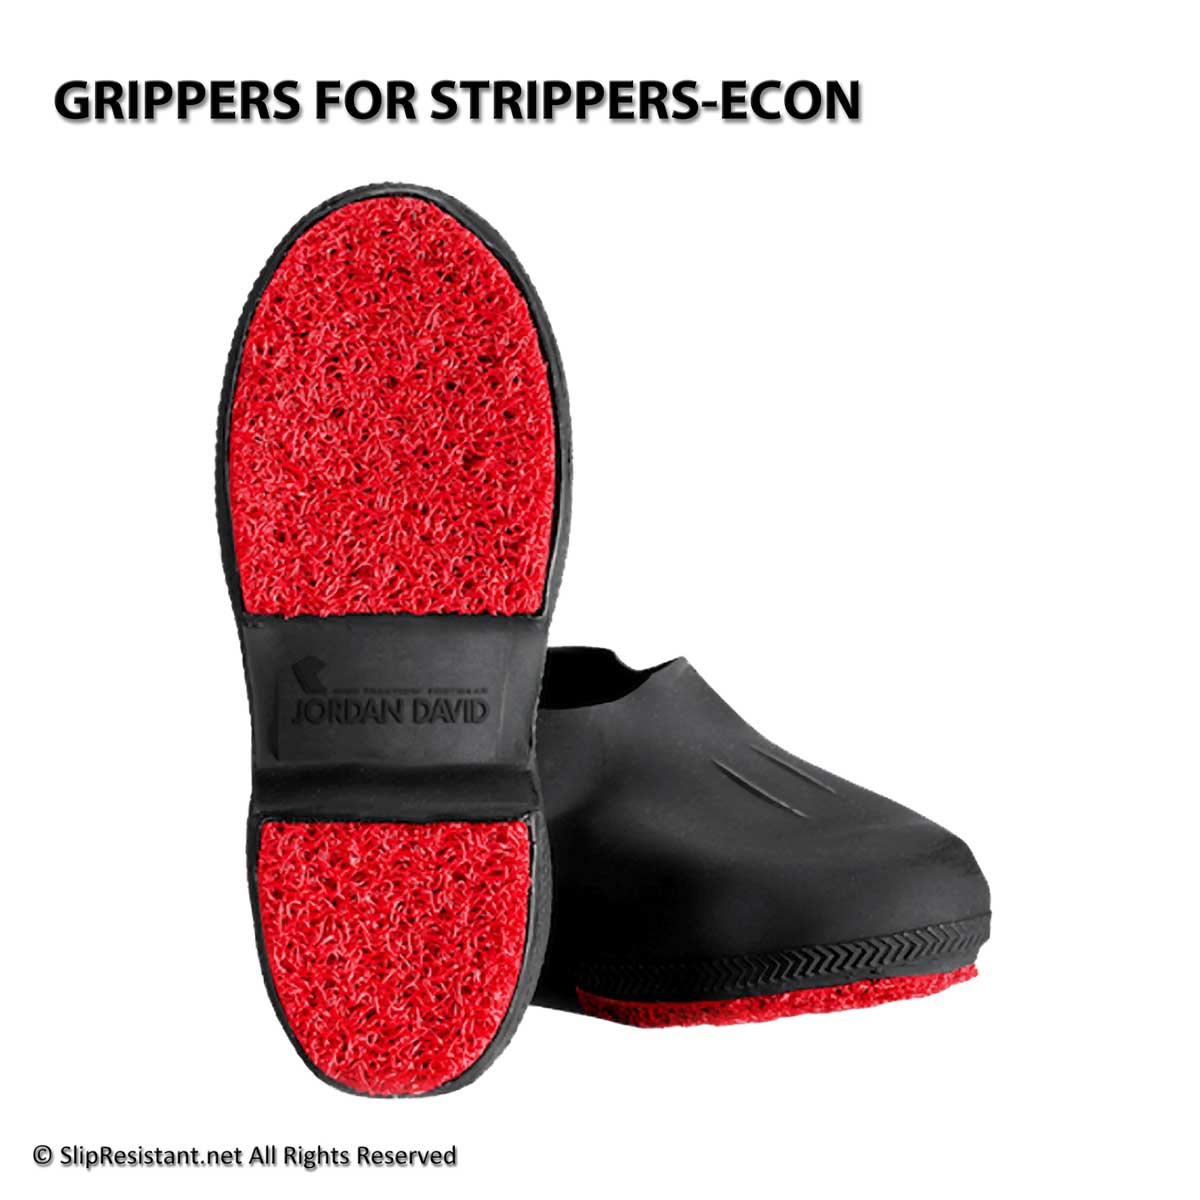 GRIPPERS FOR STRIPPERS ECON JD2216